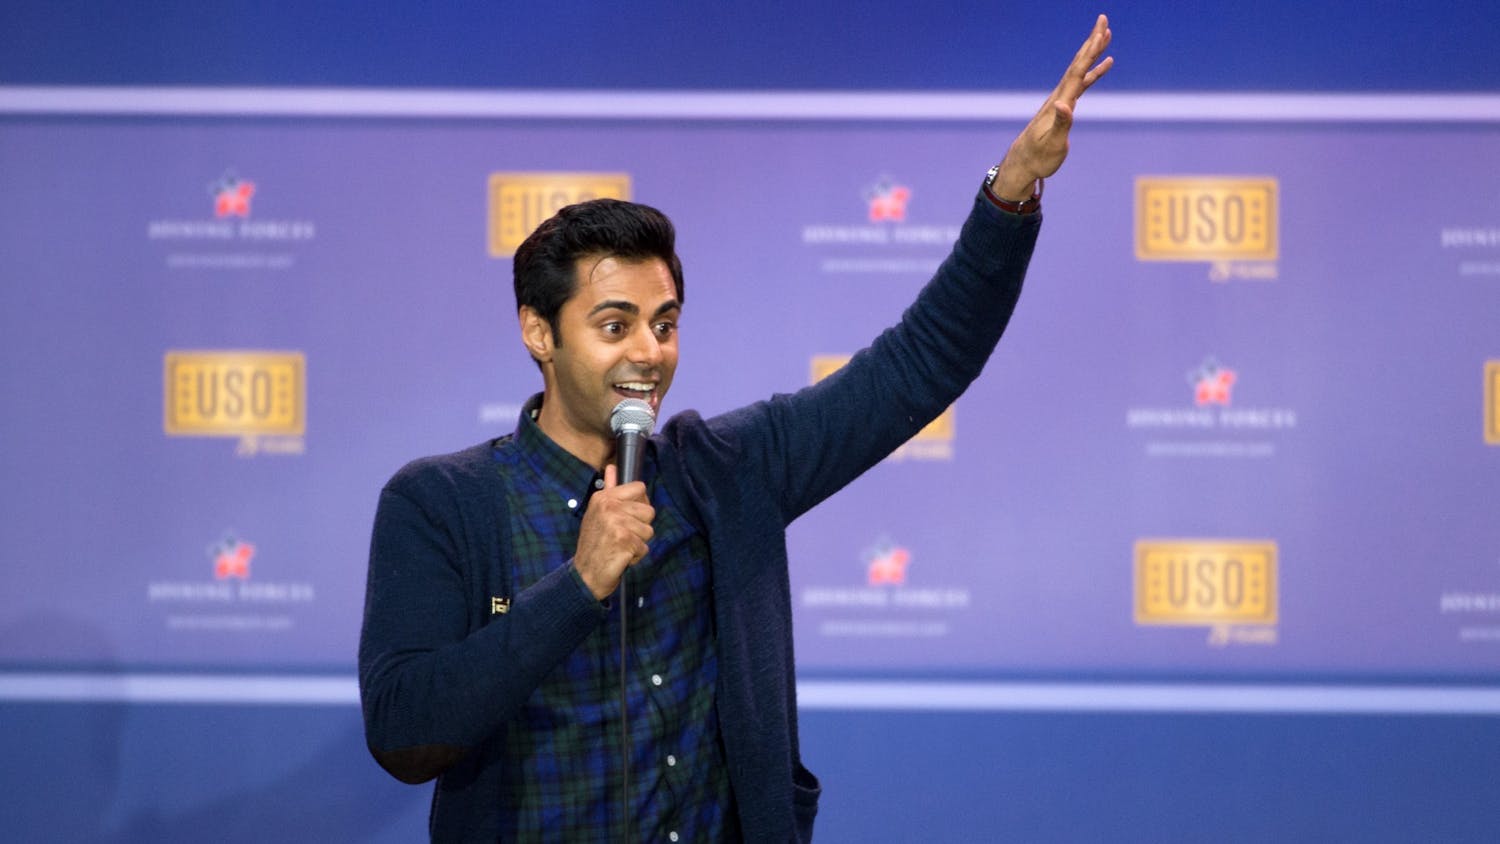 Comedian Hasan Minhaj performs during a comedy show at Joint Base Andrews in Washington in 2016.